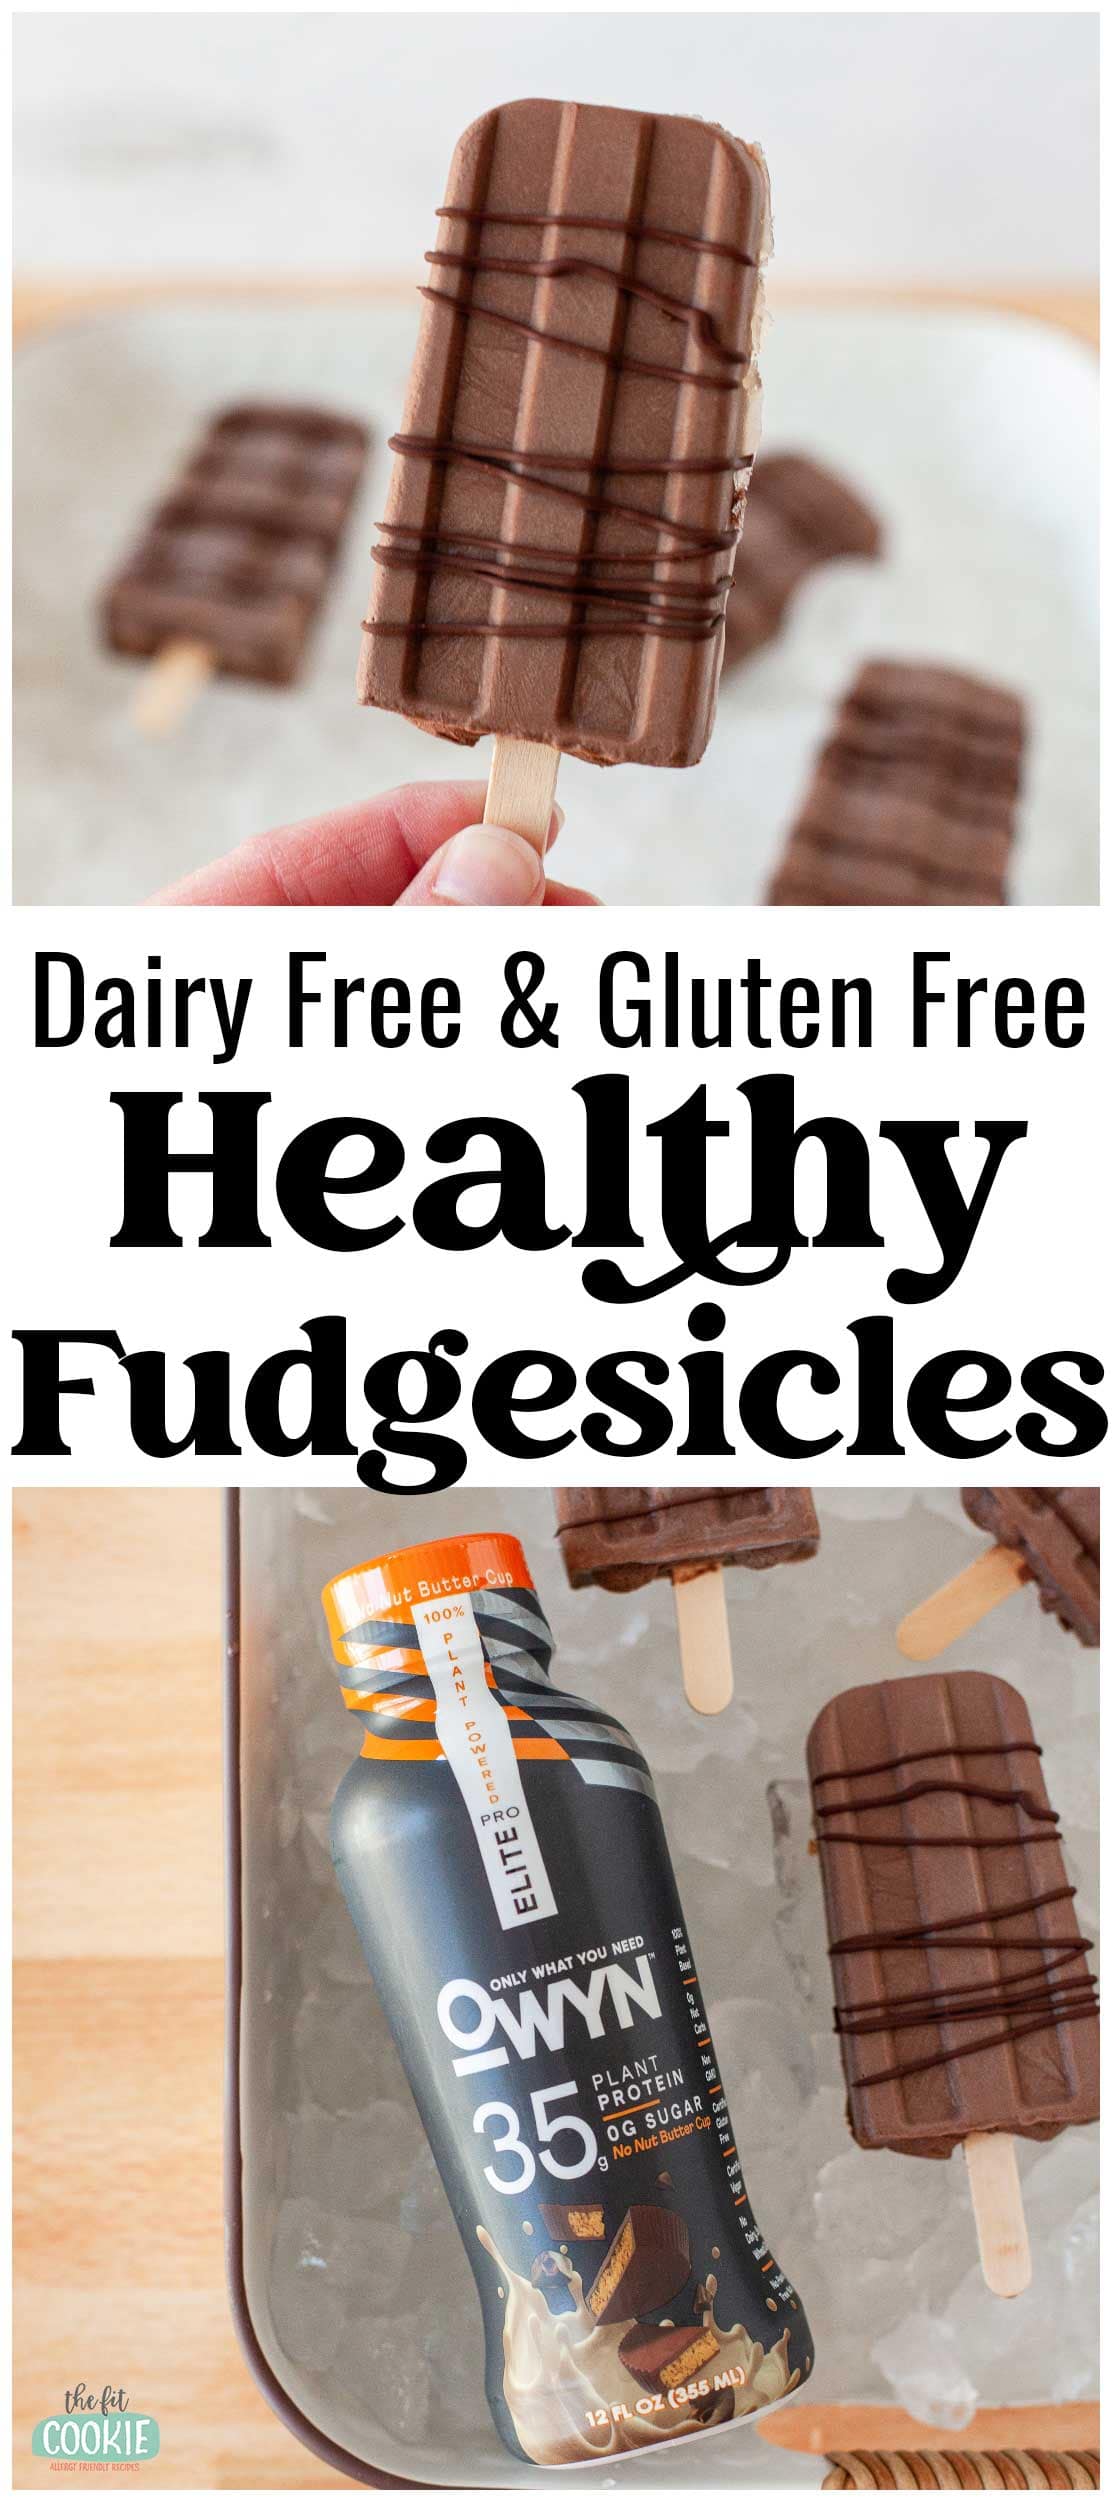 photo collage of healthy dairy free fudgesicles